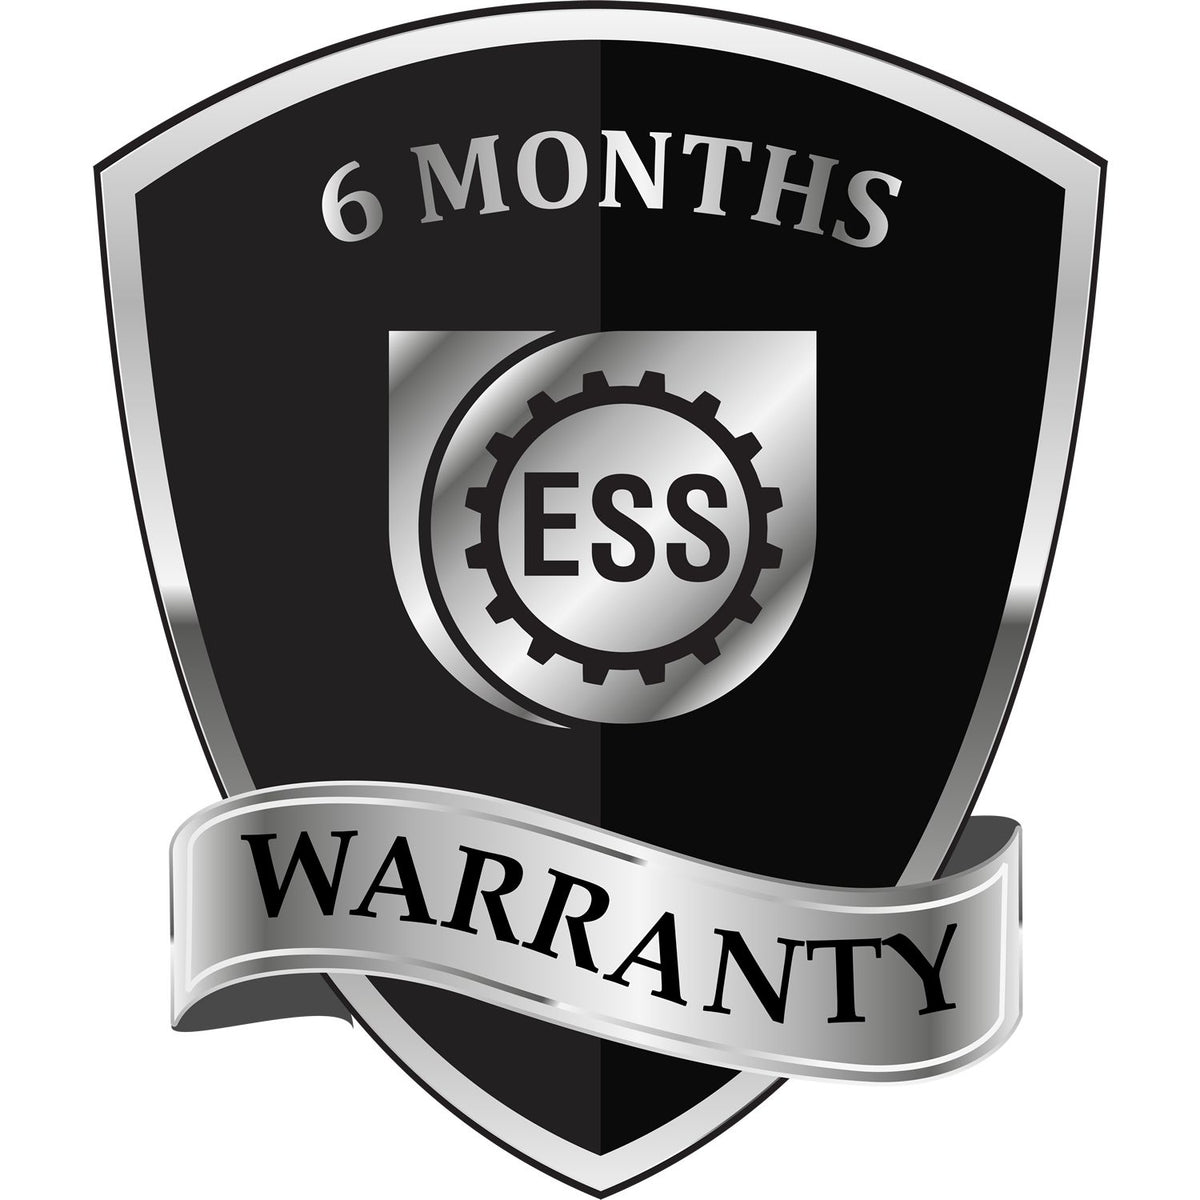 A badge or emblem showing a warranty icon for the Self-Inking Ohio PE Stamp